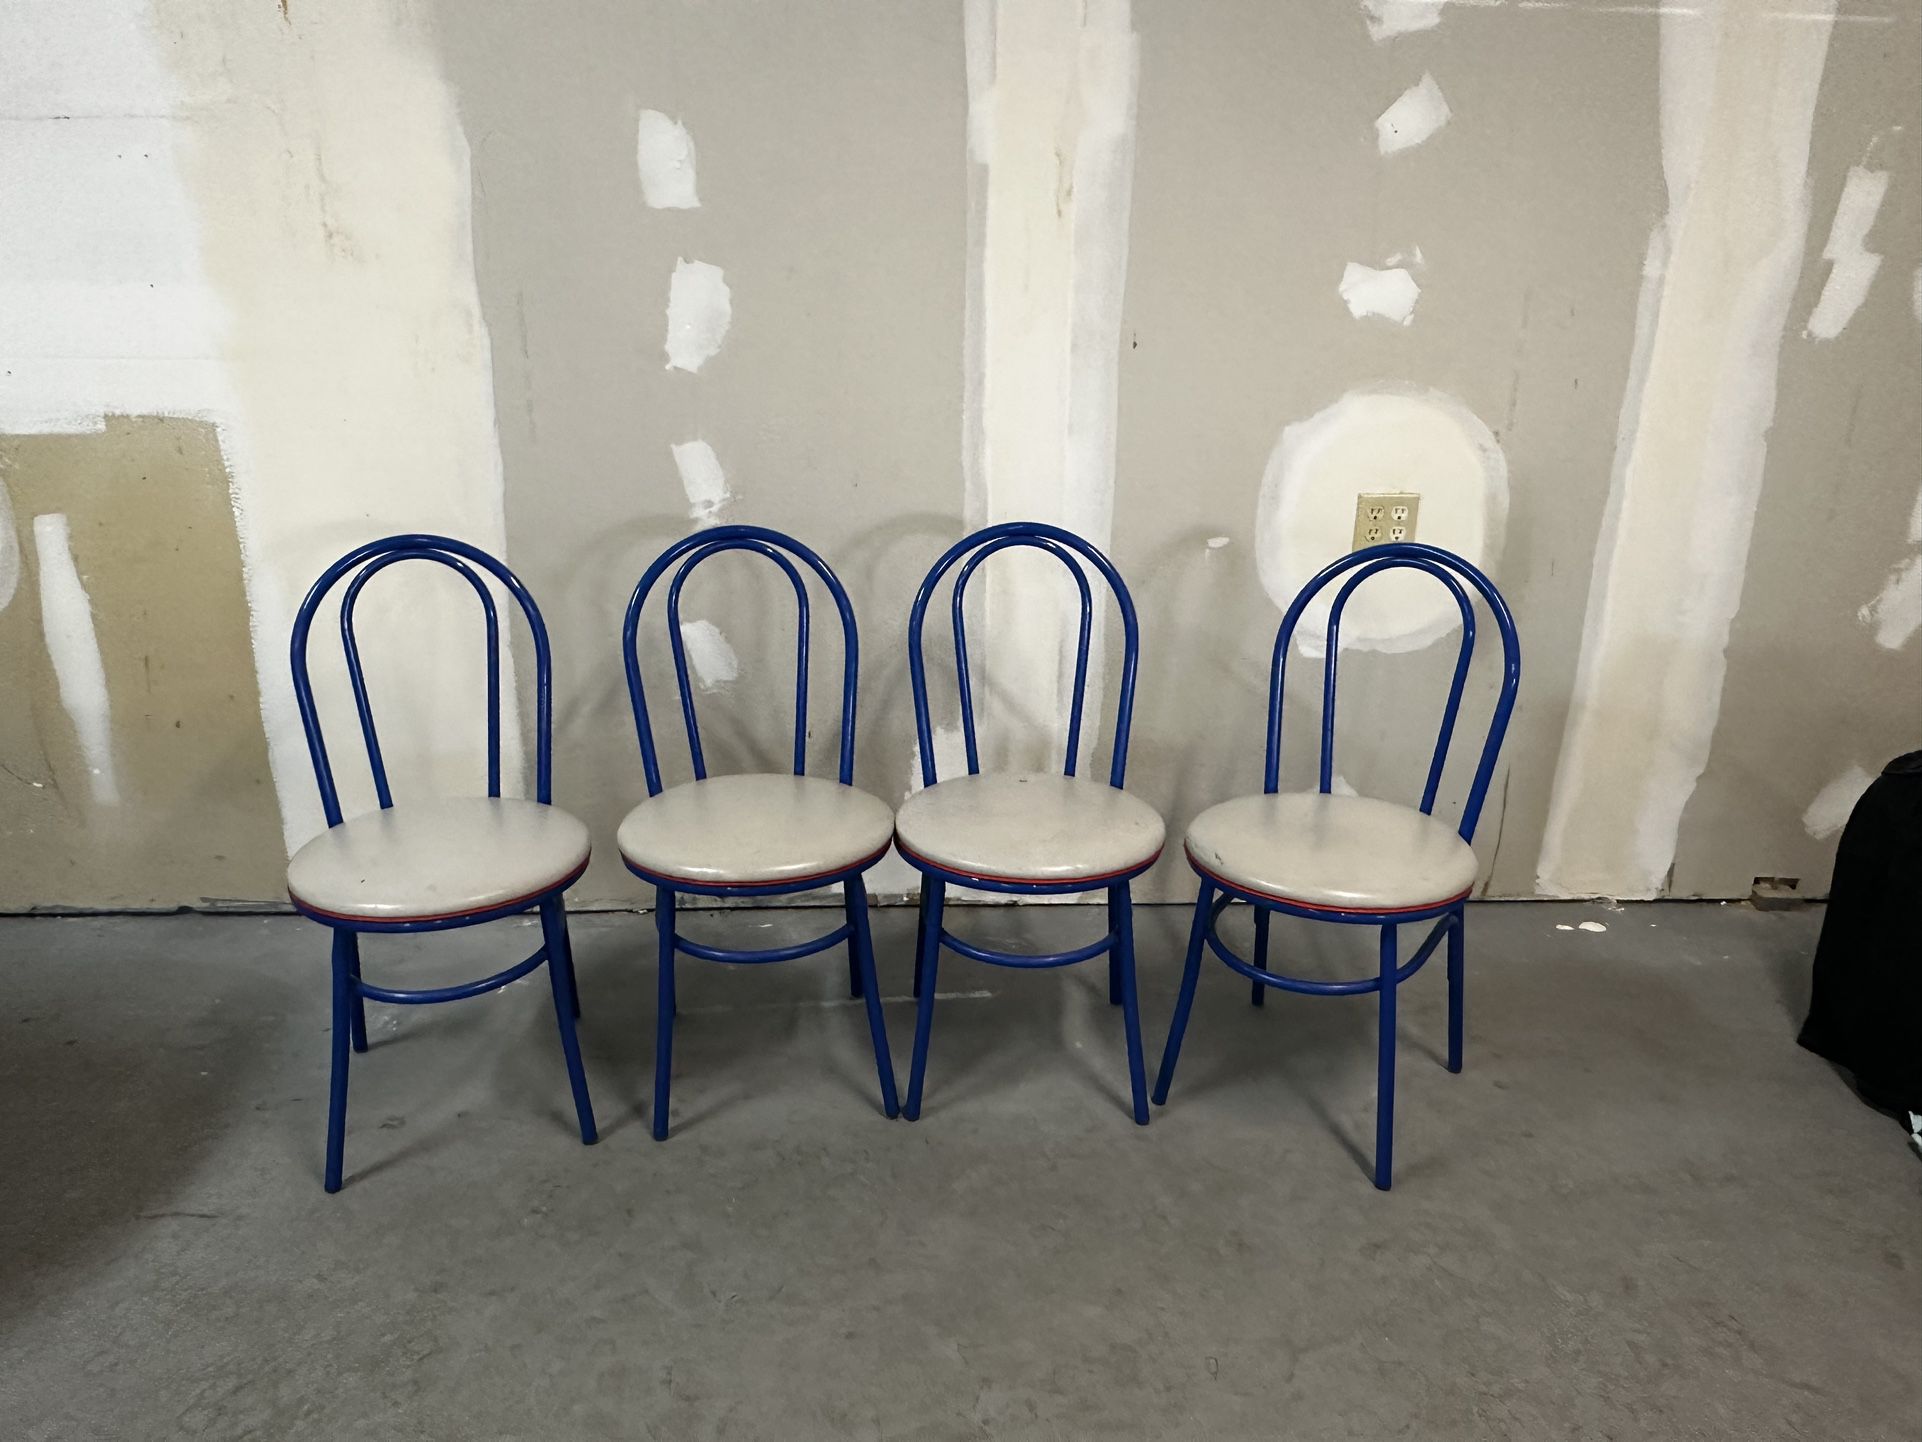 Restaurant Commercial Chairs 